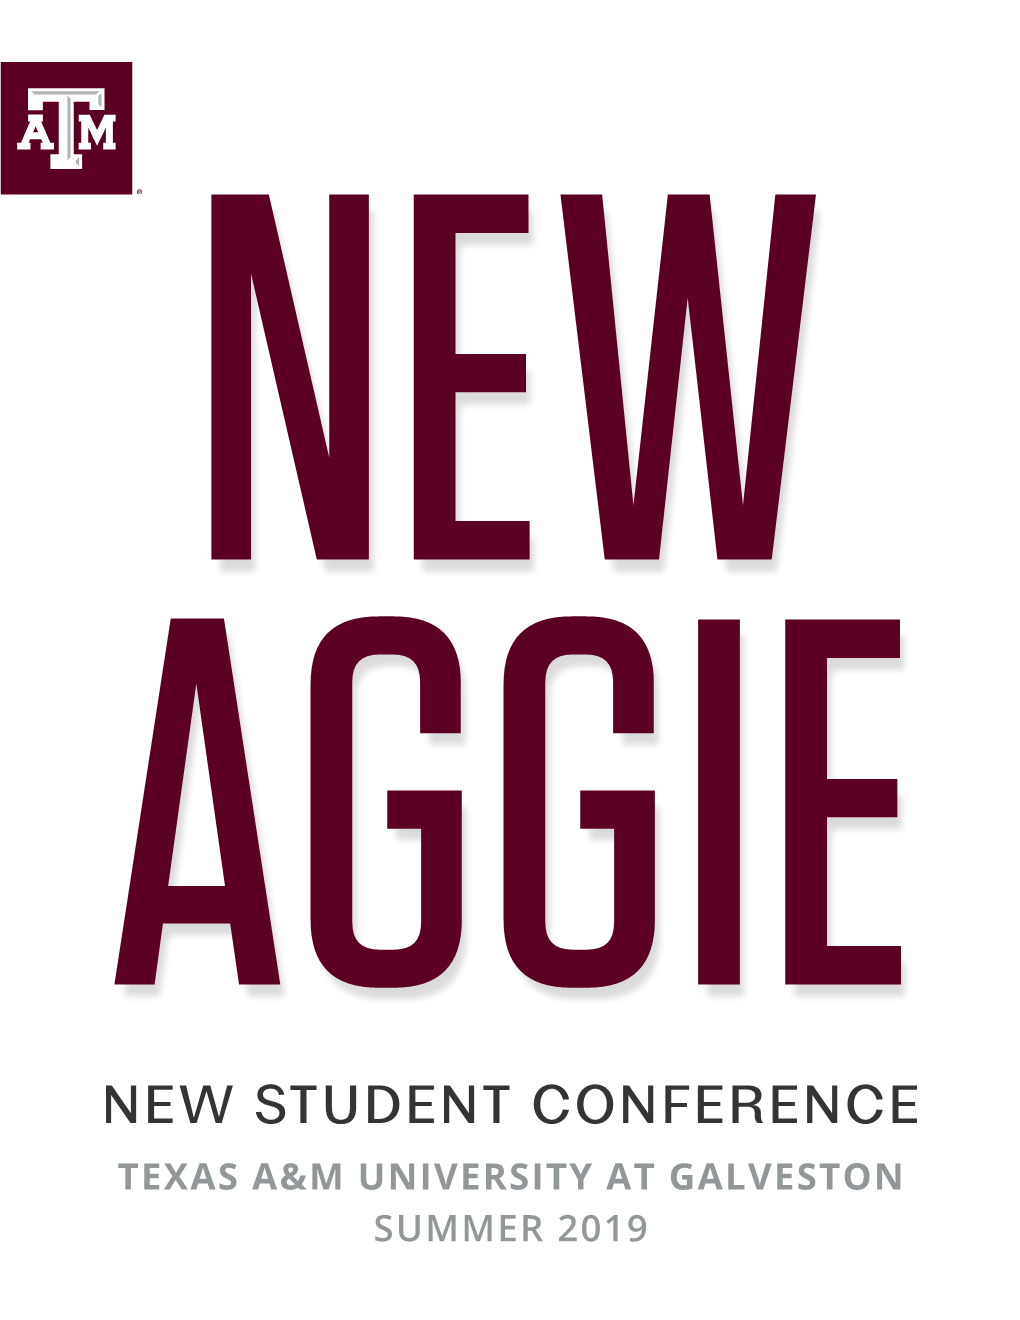 New Student Conference Texas A&M University at Galveston Summer 2019 We Are Aggies by the Sea an Introduction from Student Affairs